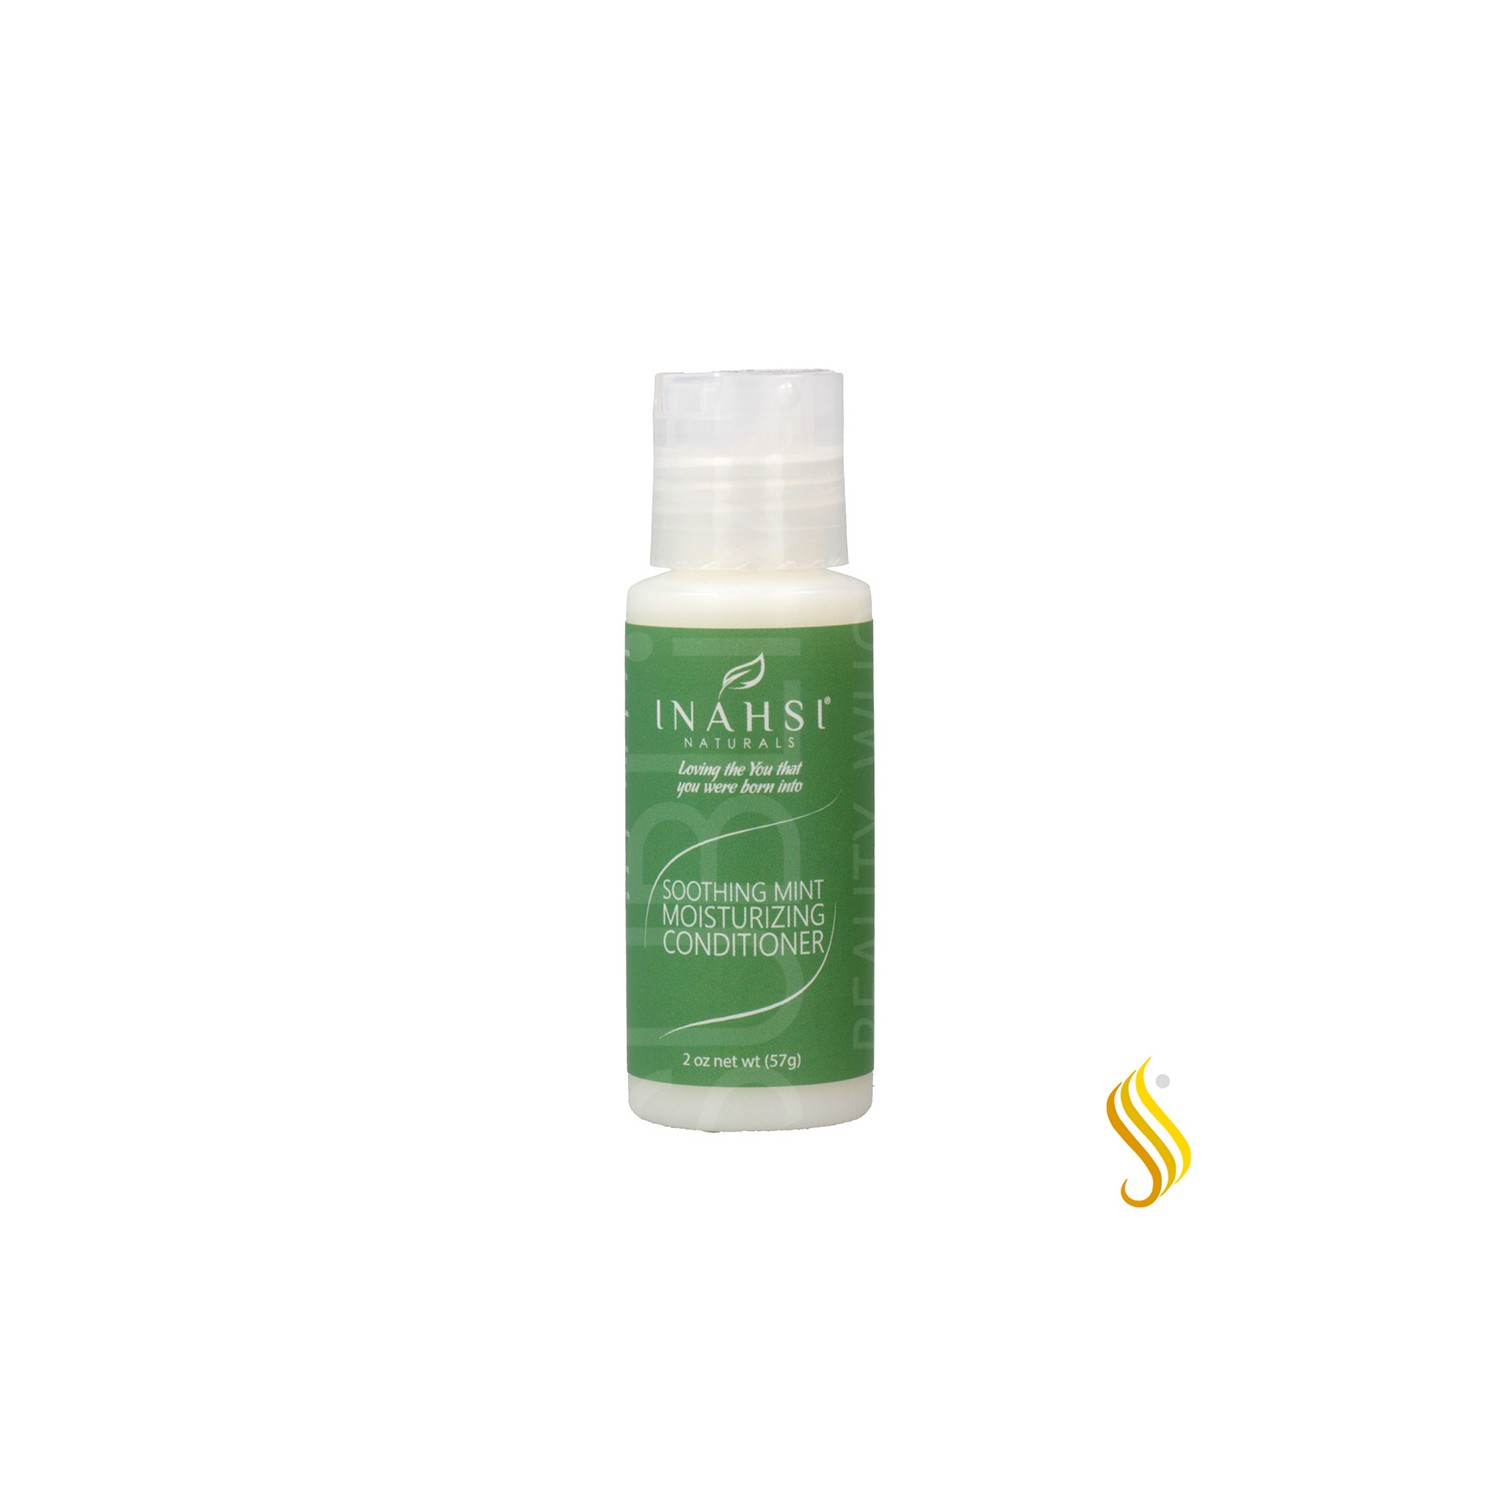 Inahsi Soothing Mint Moisturizing Conditioner 57 gr